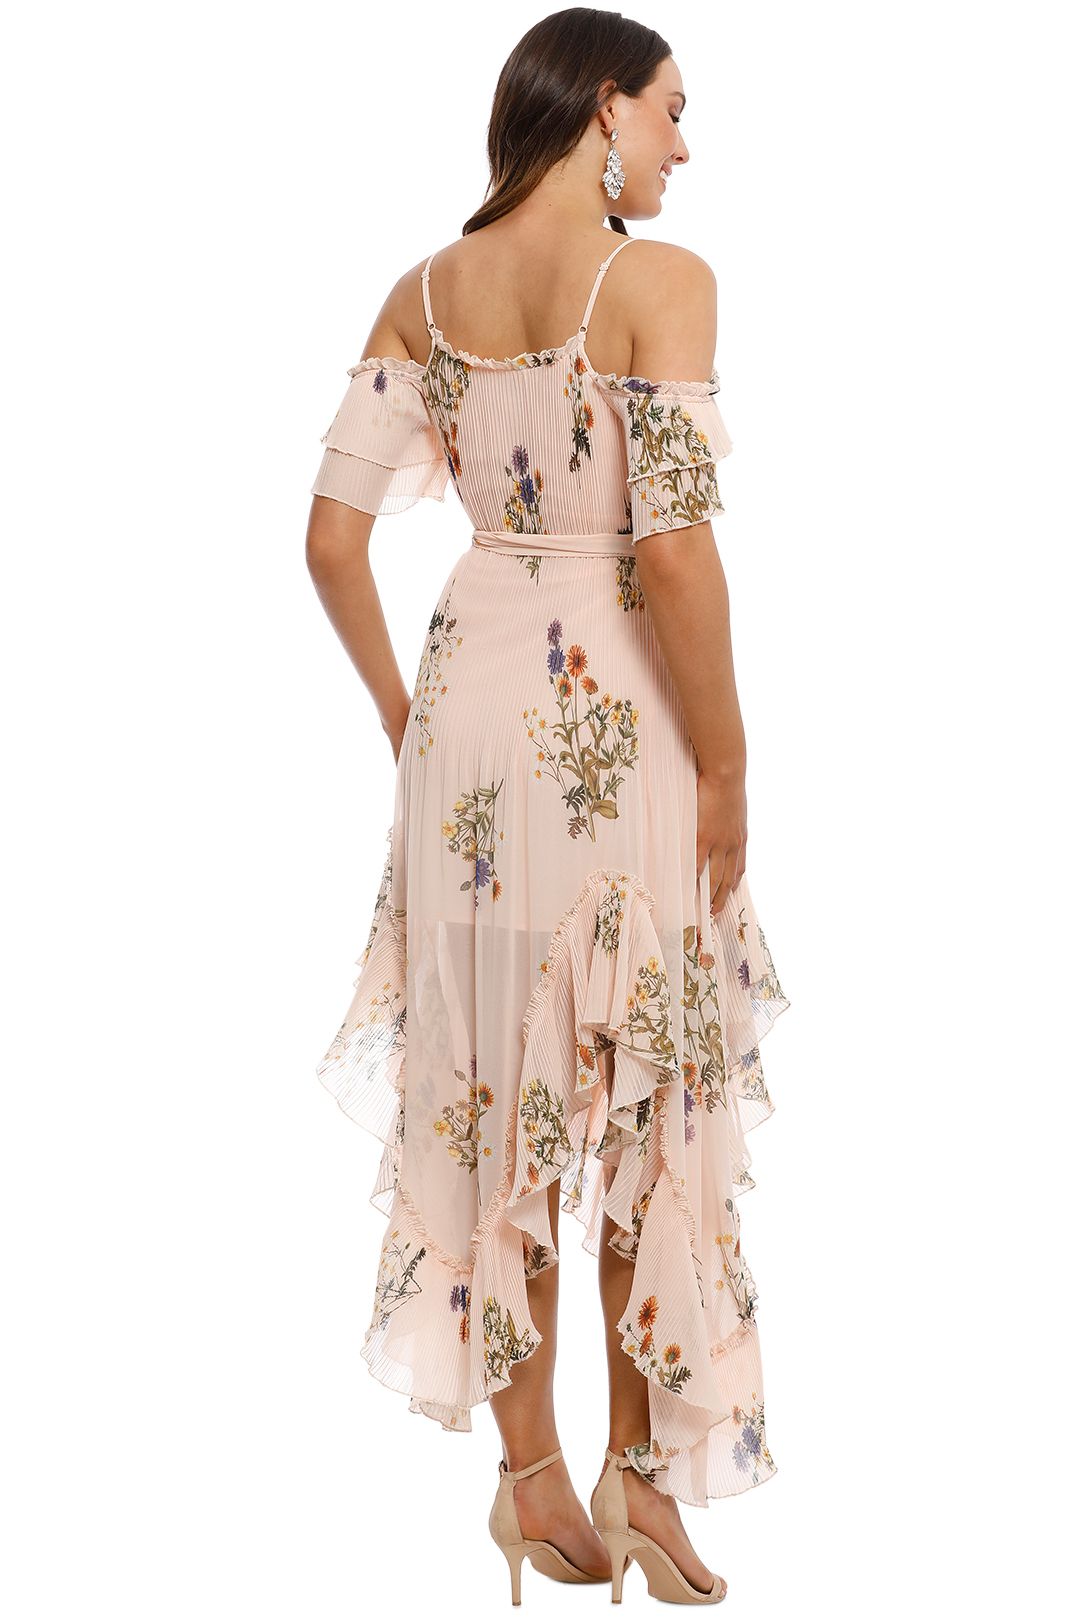 We Are Kindred - Country Field Maxi Dress - Blush - Back